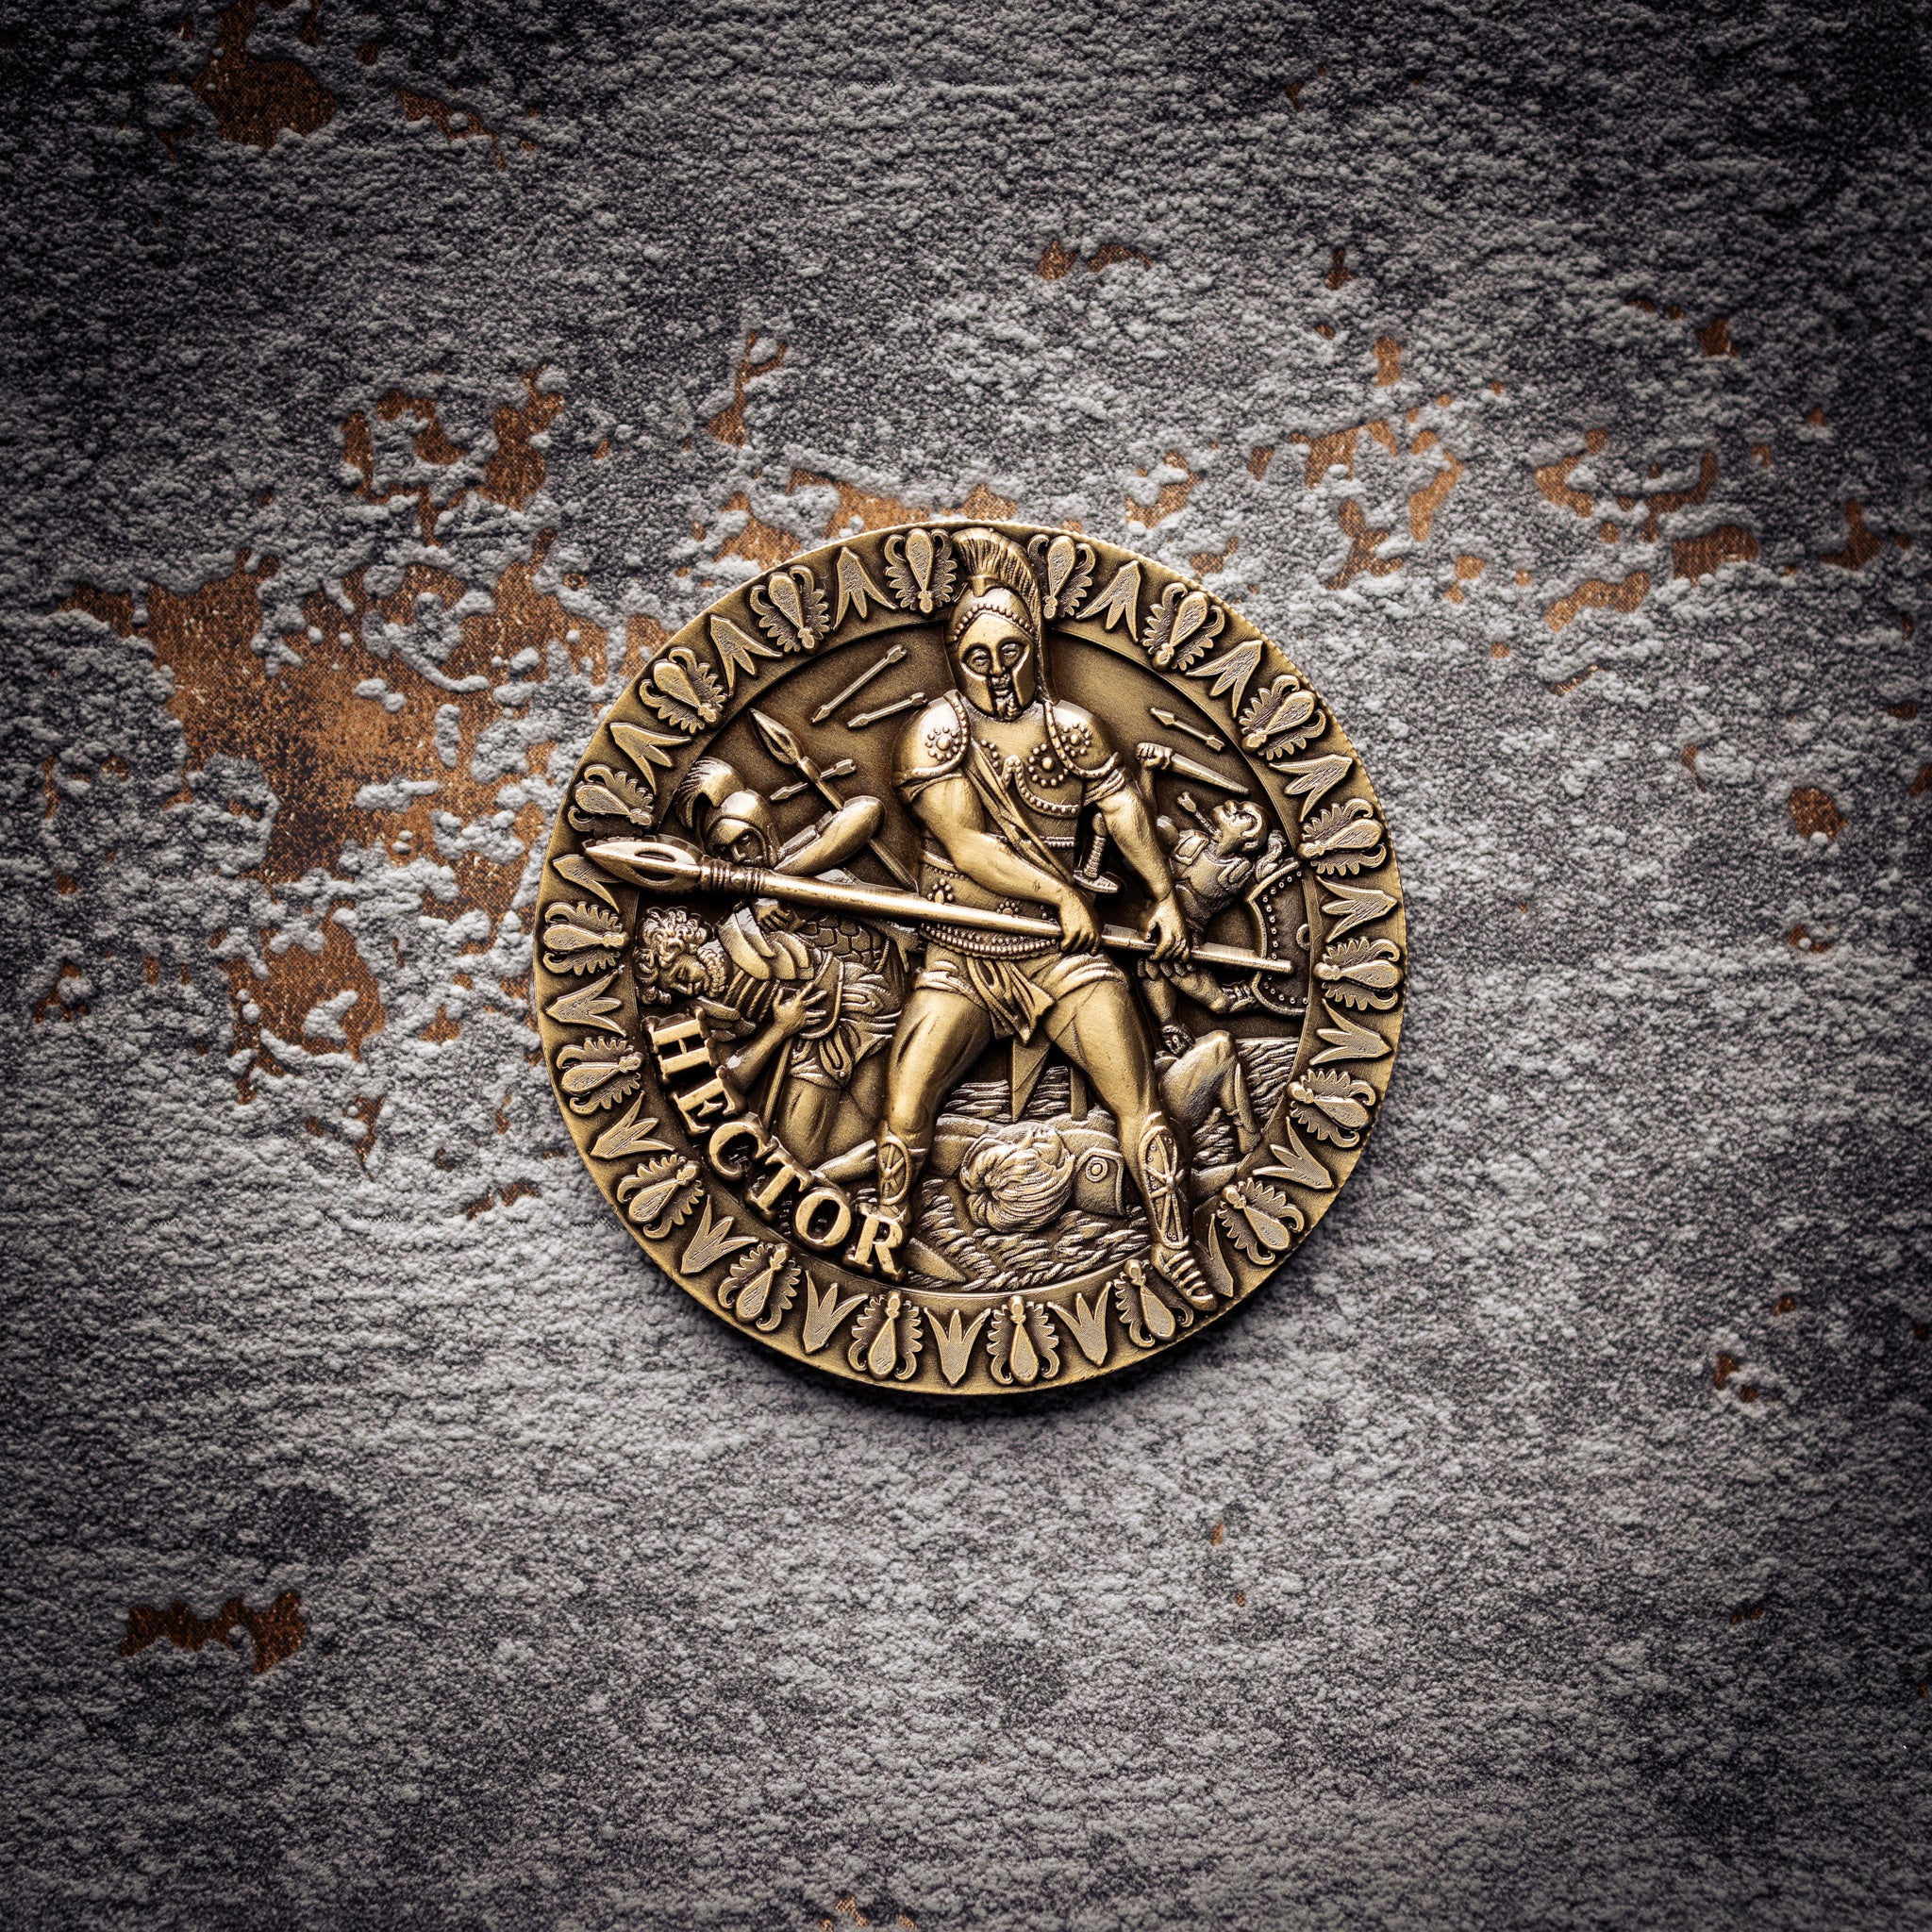 Troy - Hector 55mm Coin